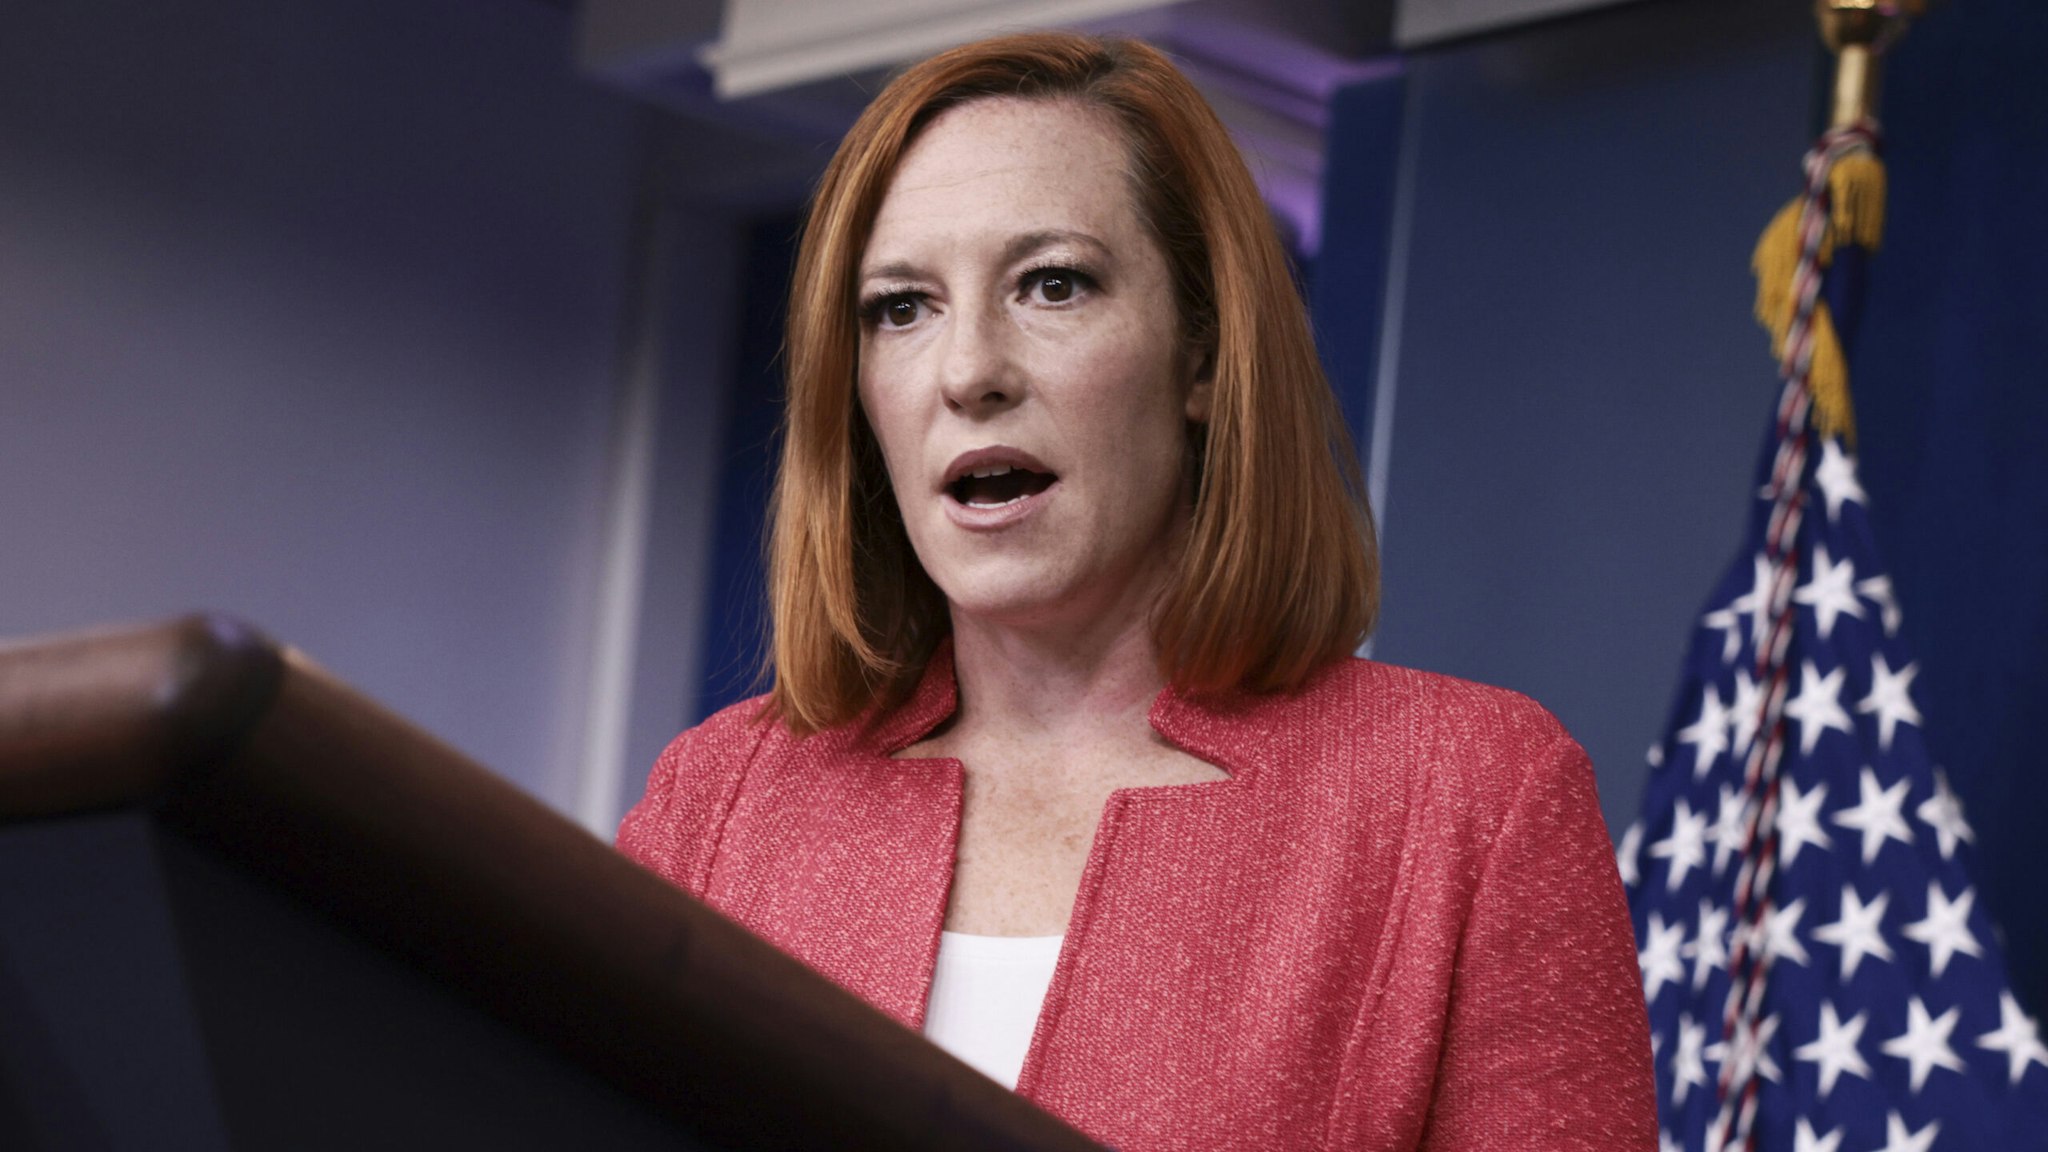 WASHINGTON, DC - SEPTEMBER 27: White House Press Secretary Jen Psaki speaks at a press briefing in the James Brady Press Briefing Room of the White House on September 27 2021 in Washington, DC. During the briefing Psaki answered a range of questions on topics including Covid-19 booster shots and China’s recent release of Canadians Michael Kovrig and Michael Spavor.